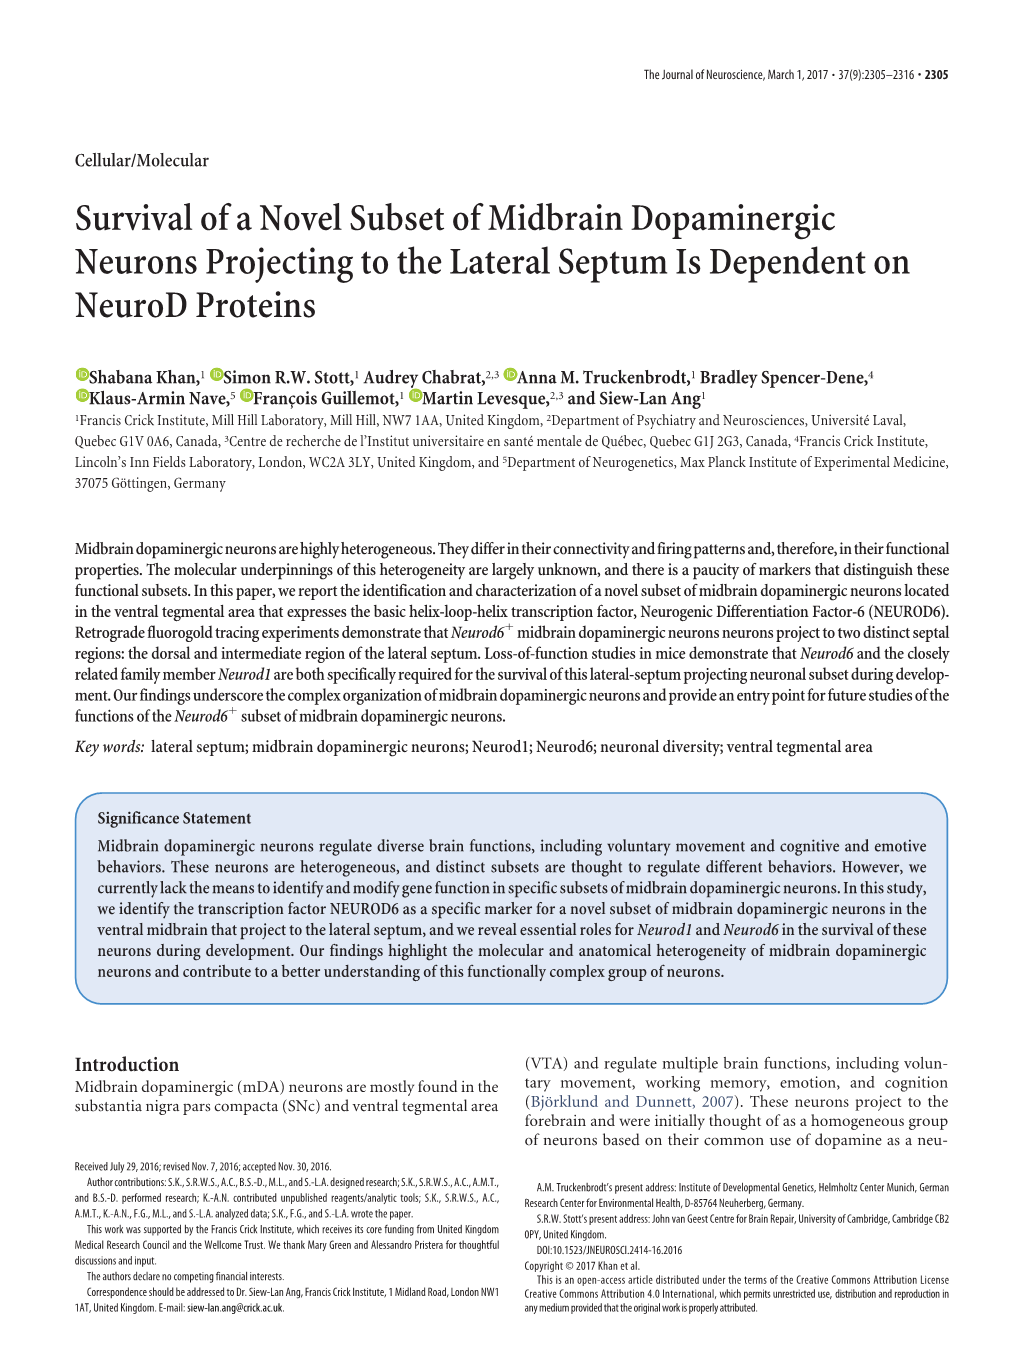 Survival of a Novel Subset of Midbrain Dopaminergic Neurons Projecting to the Lateral Septum Is Dependent on Neurod Proteins